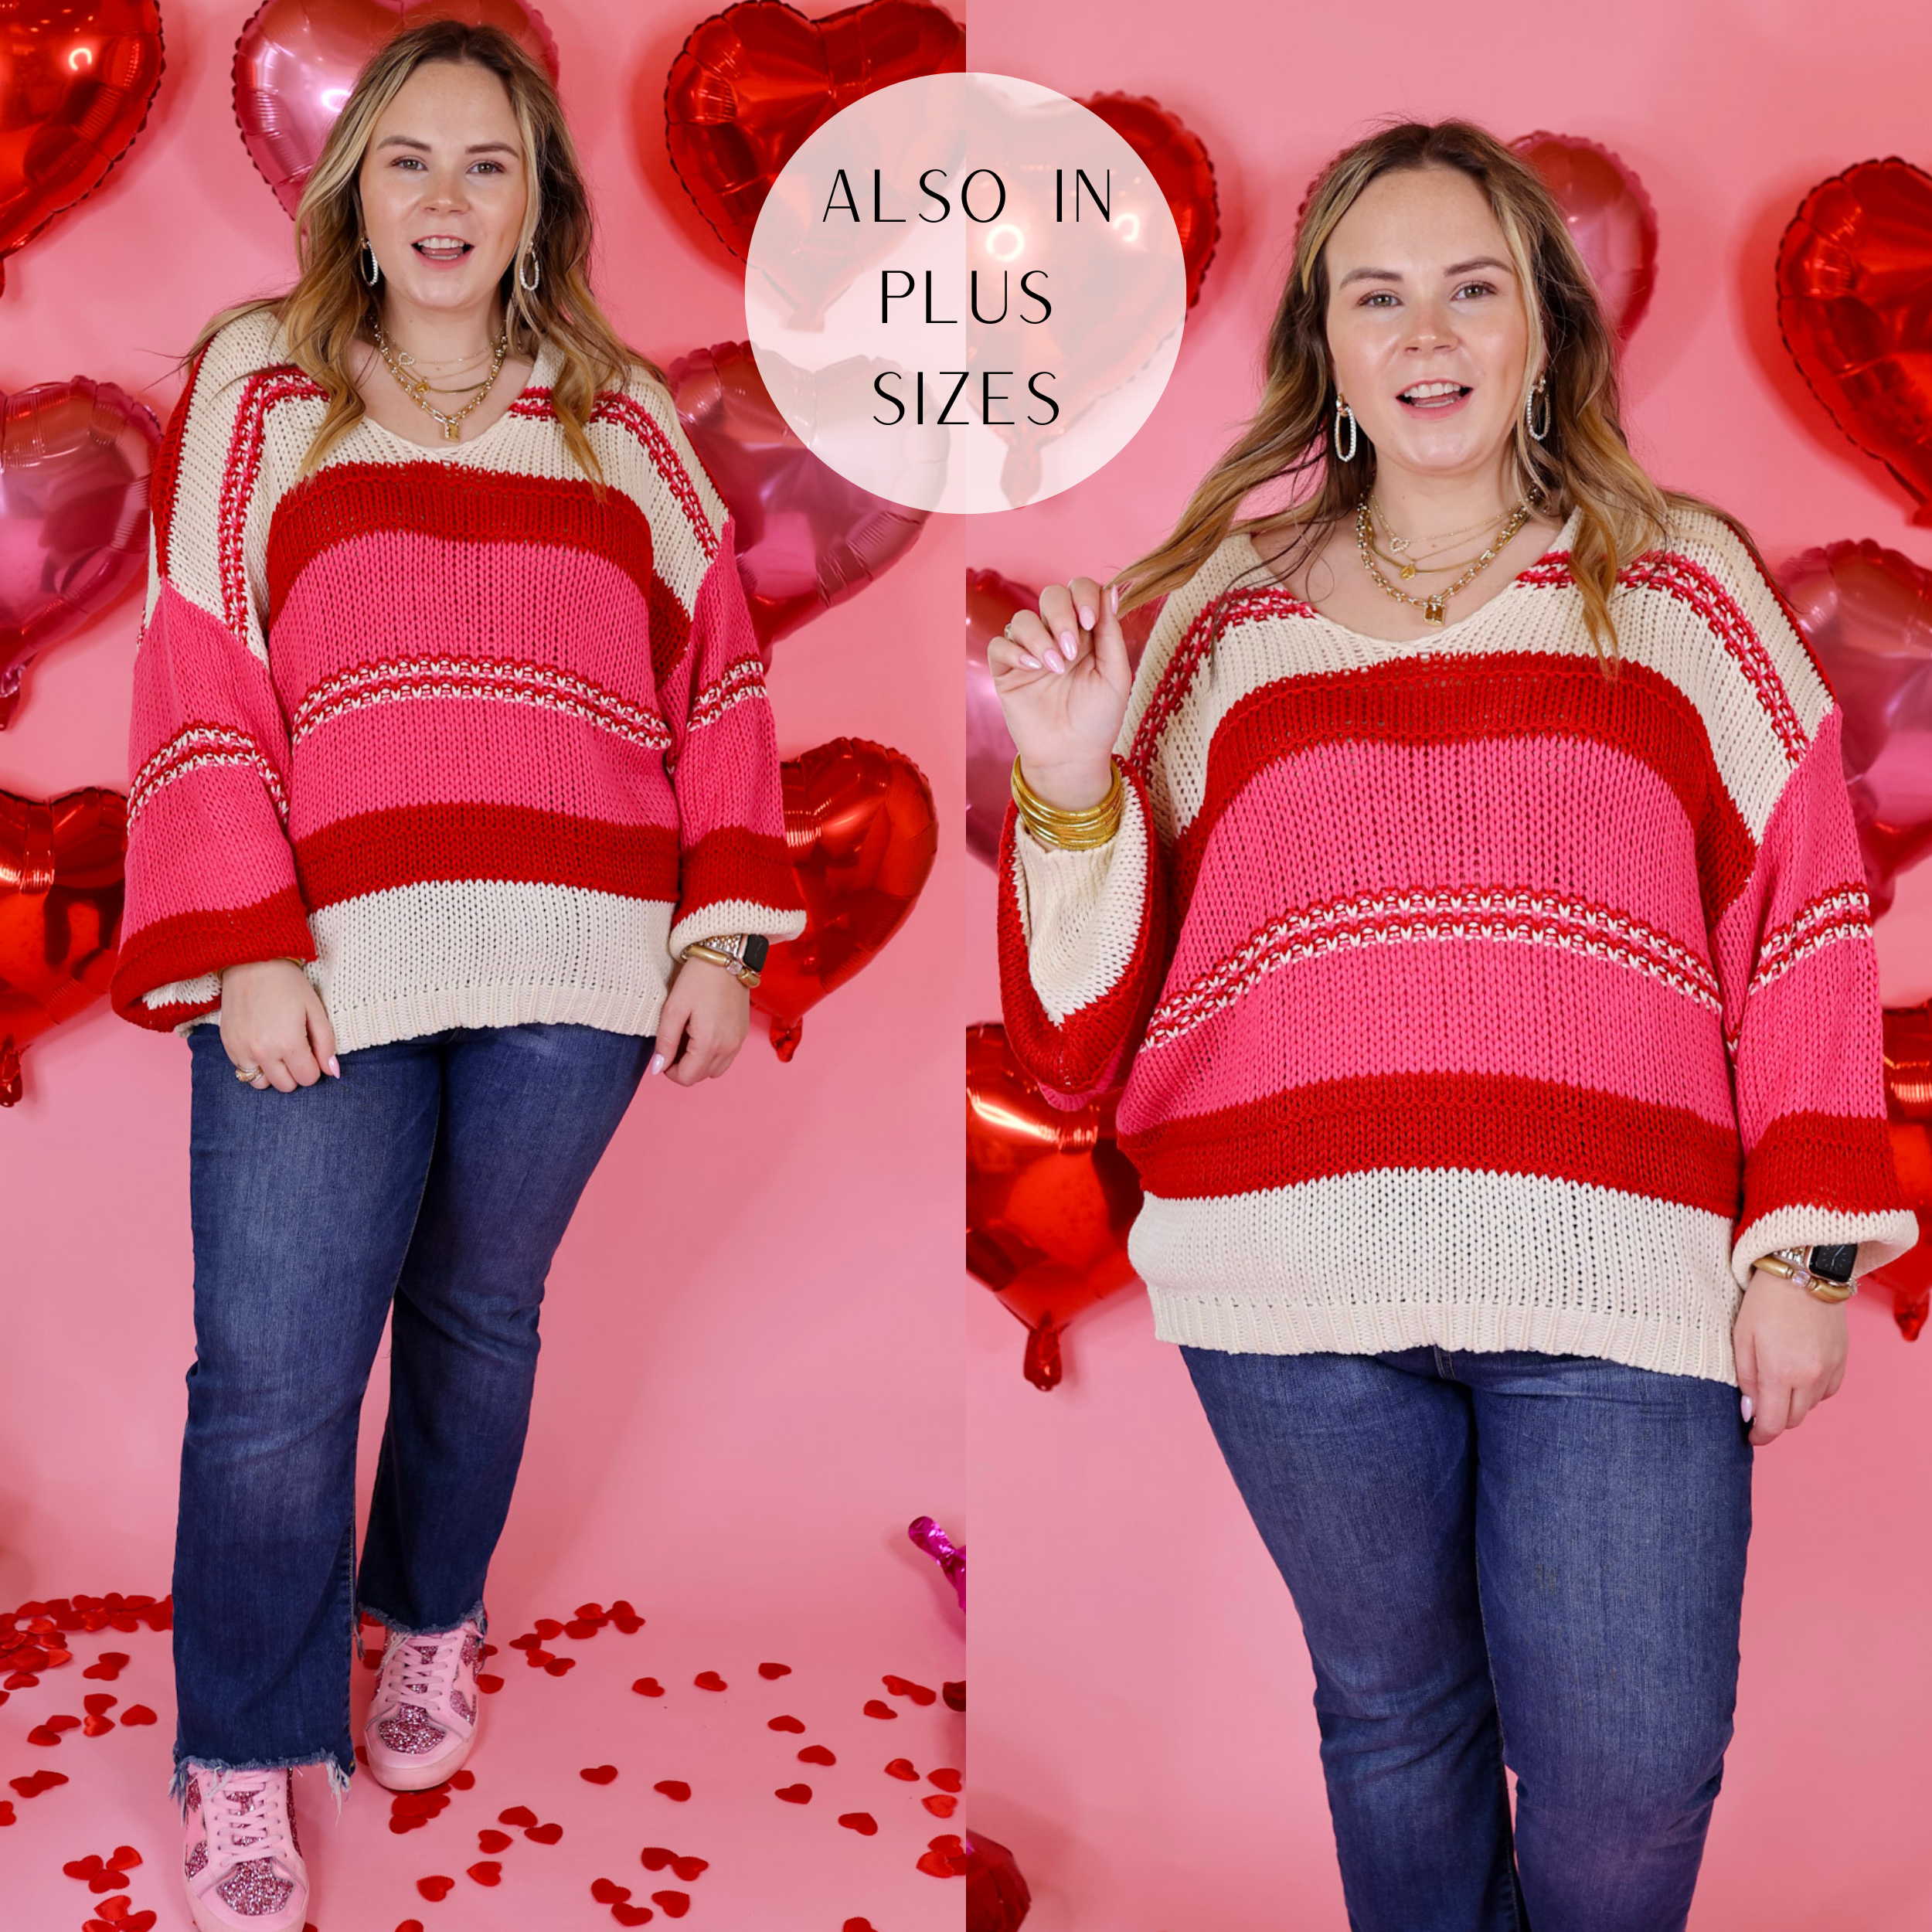 Model is wearing a long sleeve v neck striped sweater in red, white, and pink. Model has this sweater paid with straight leg jeans, sneakers, and gold jewelry. Background is light pink with red heart balloons.  